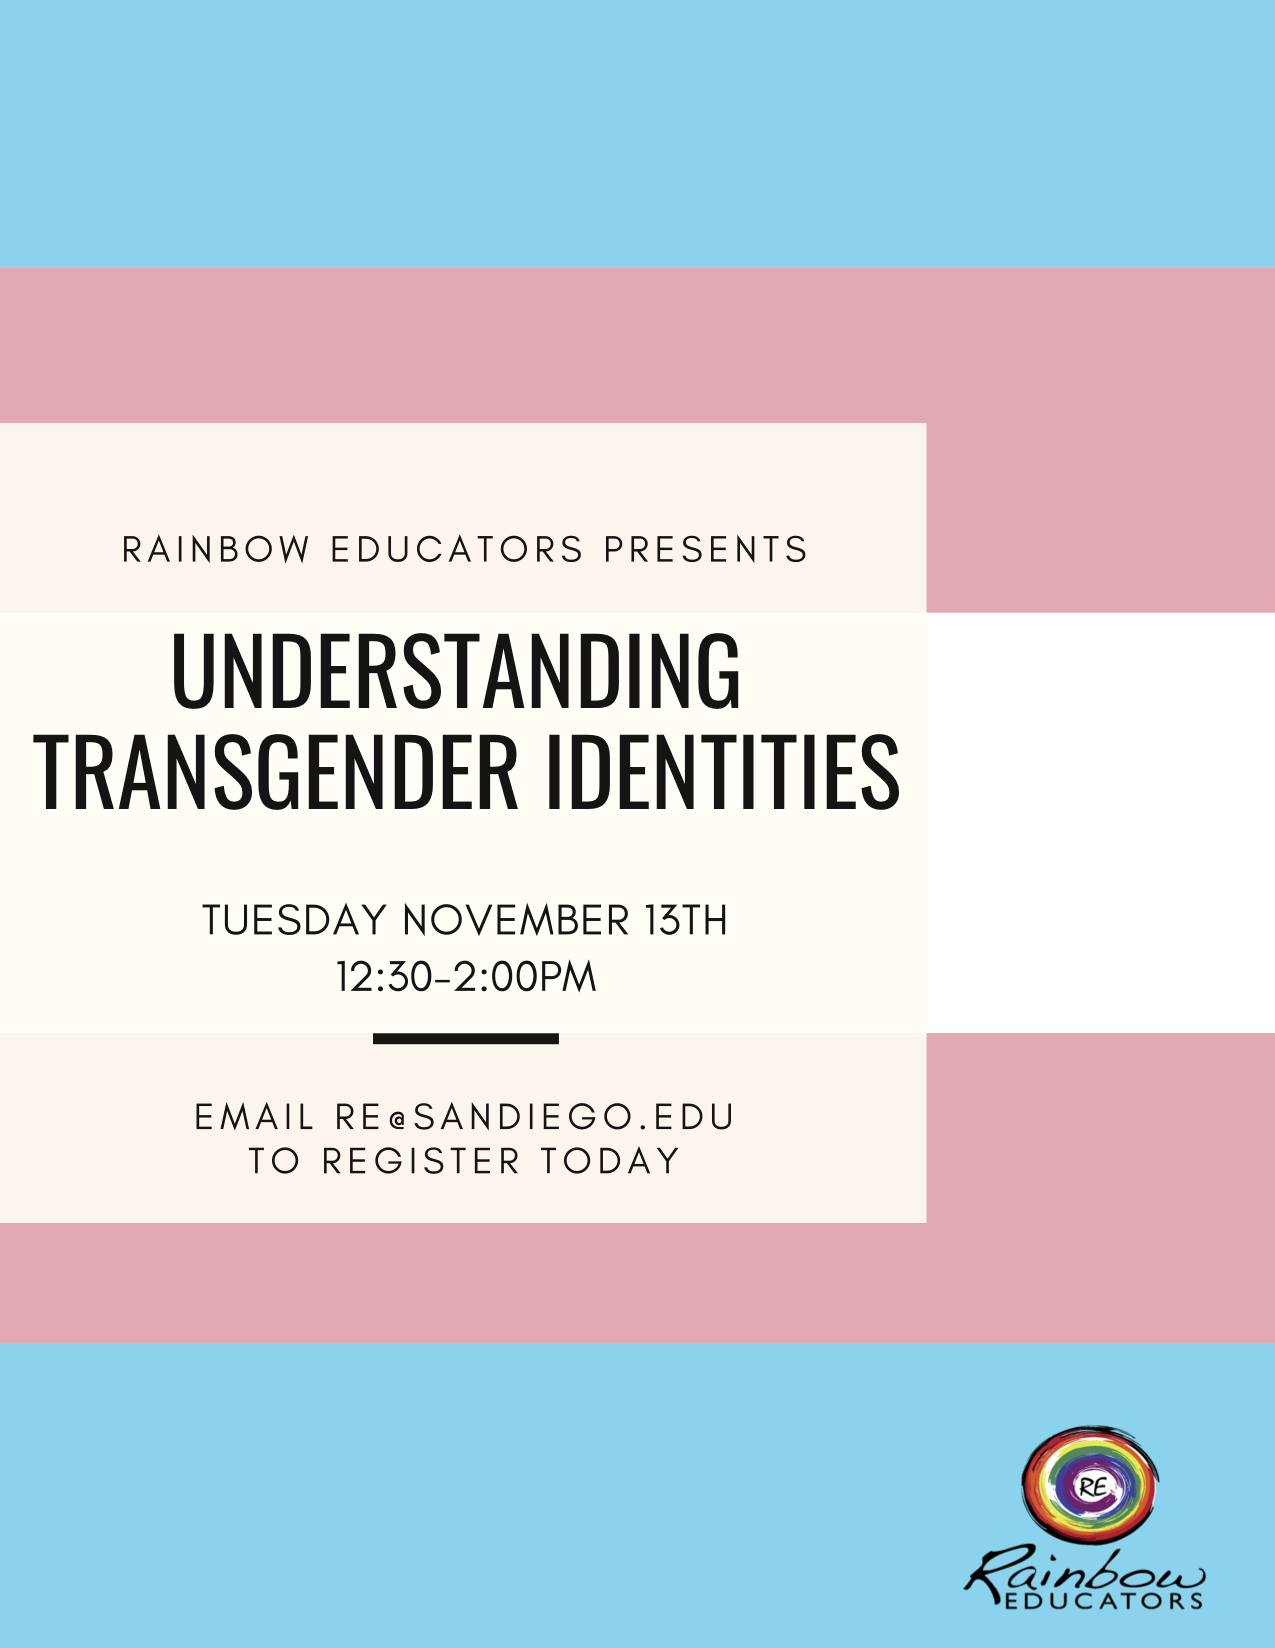 Flyer promoting the date (11/13) and time (12:30-2:00pm) of the event with a transgender flag in the background